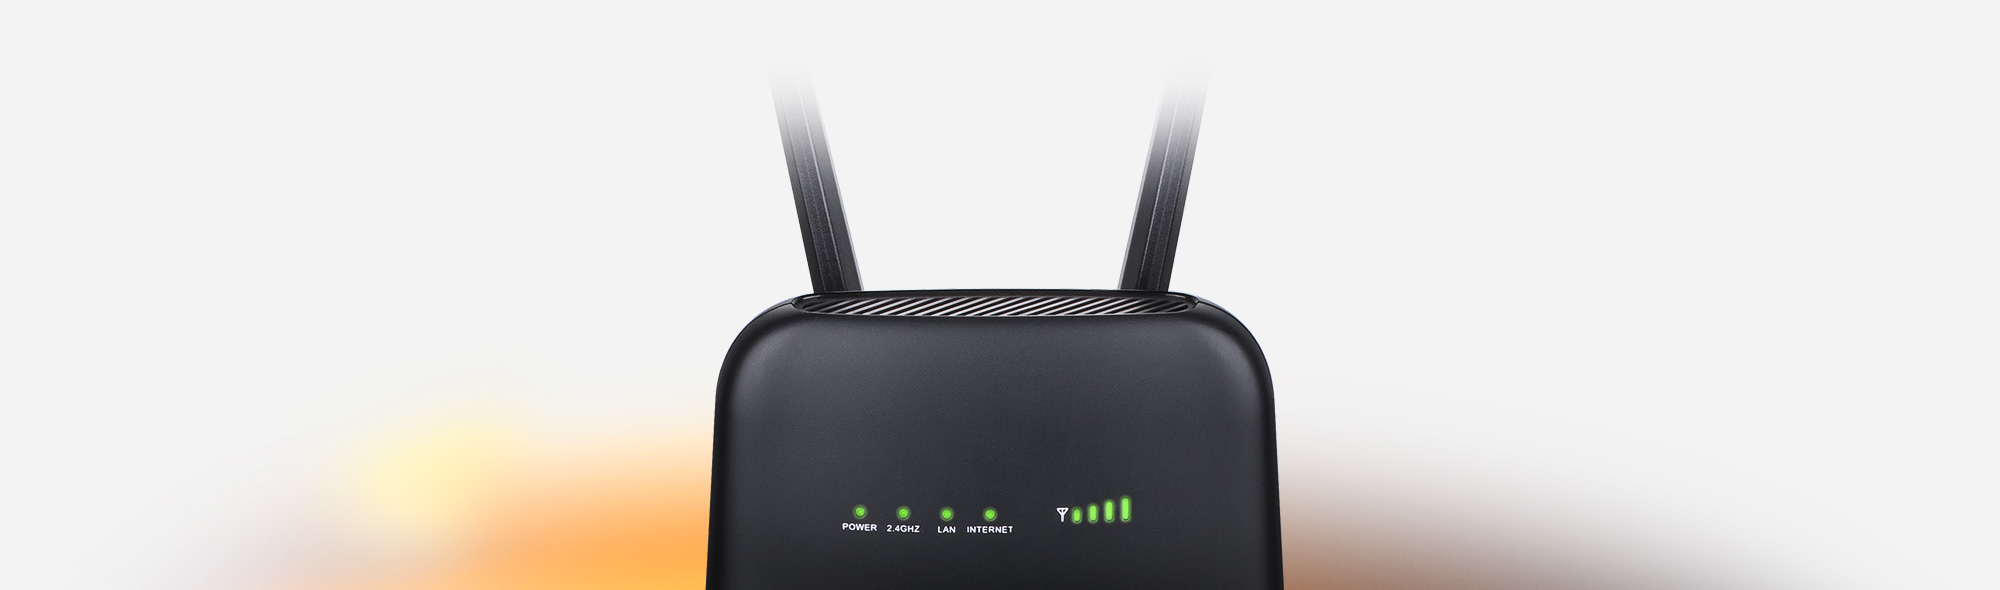 DWR-920 Wireless N300 4G LTE Router with a yellow background